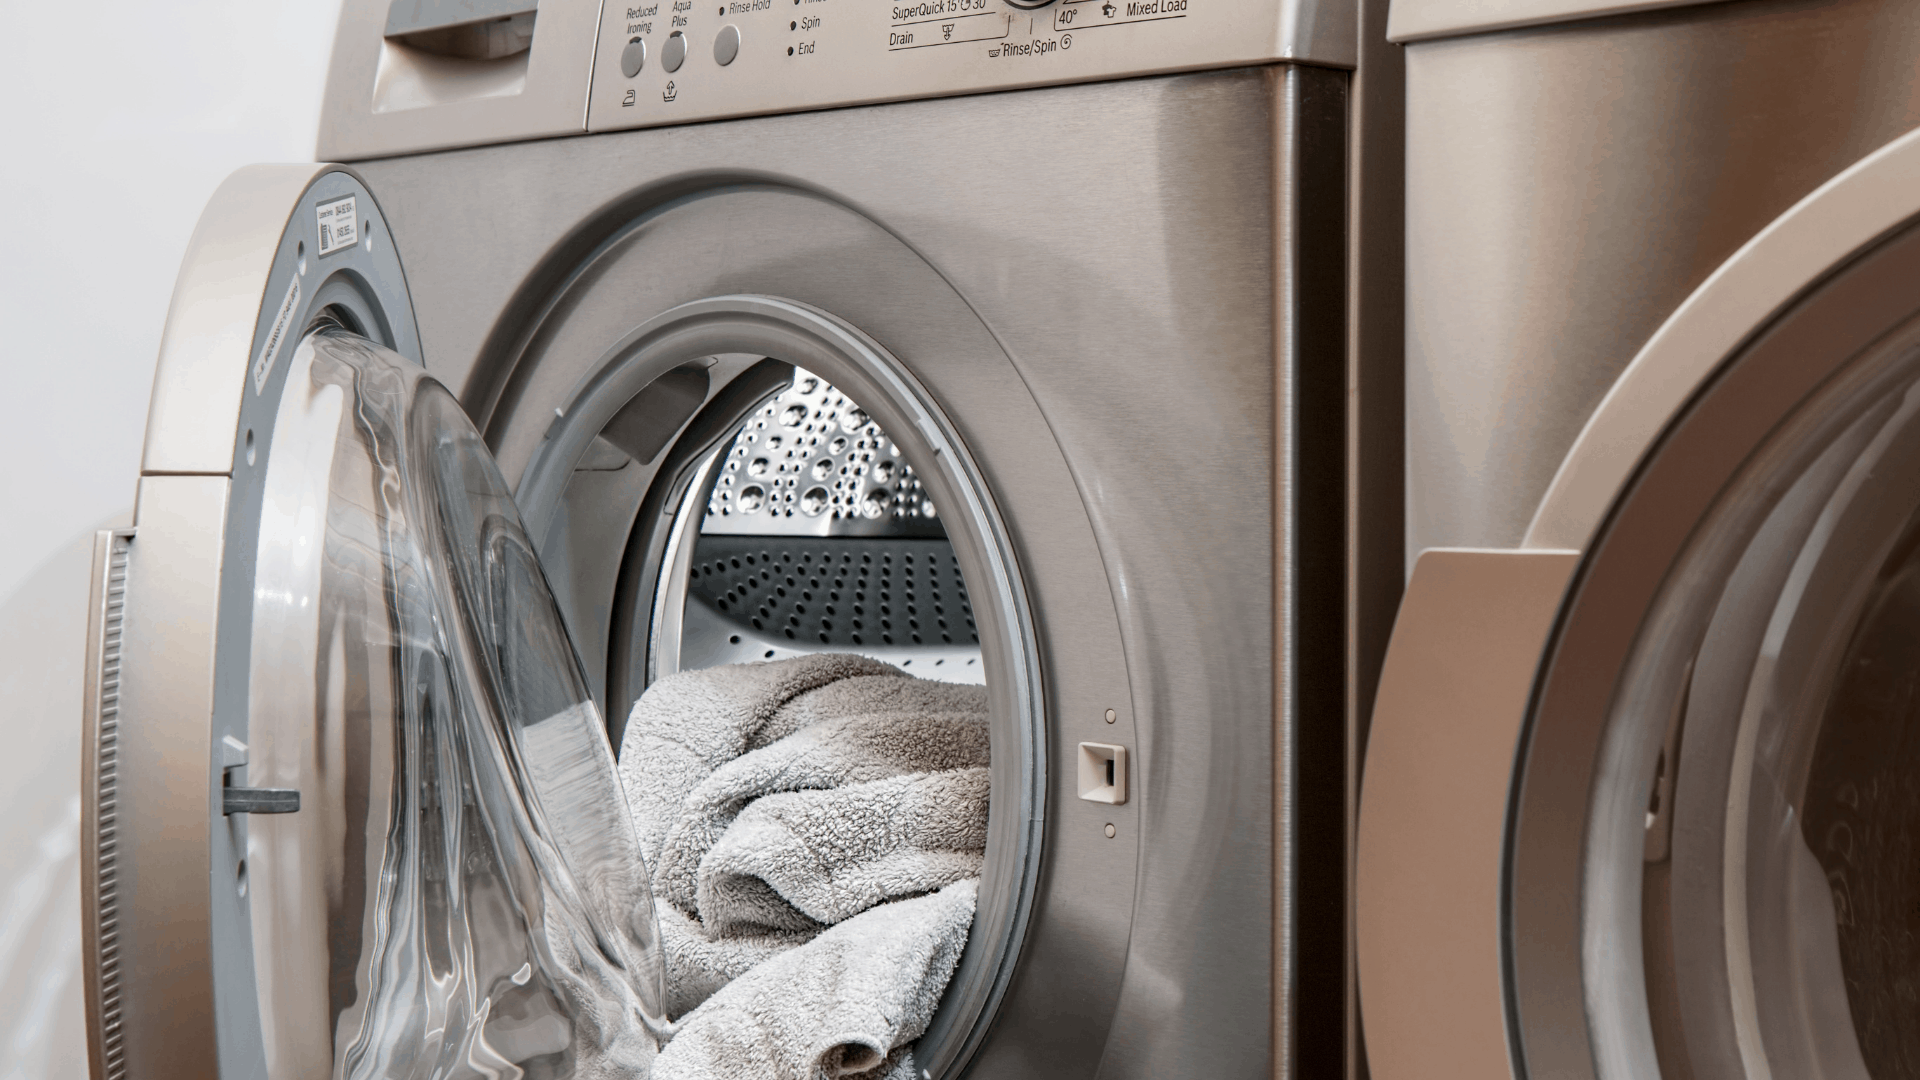 Dryer Takes Forever To Dry? Here's Why. • Appliance Parts & Services